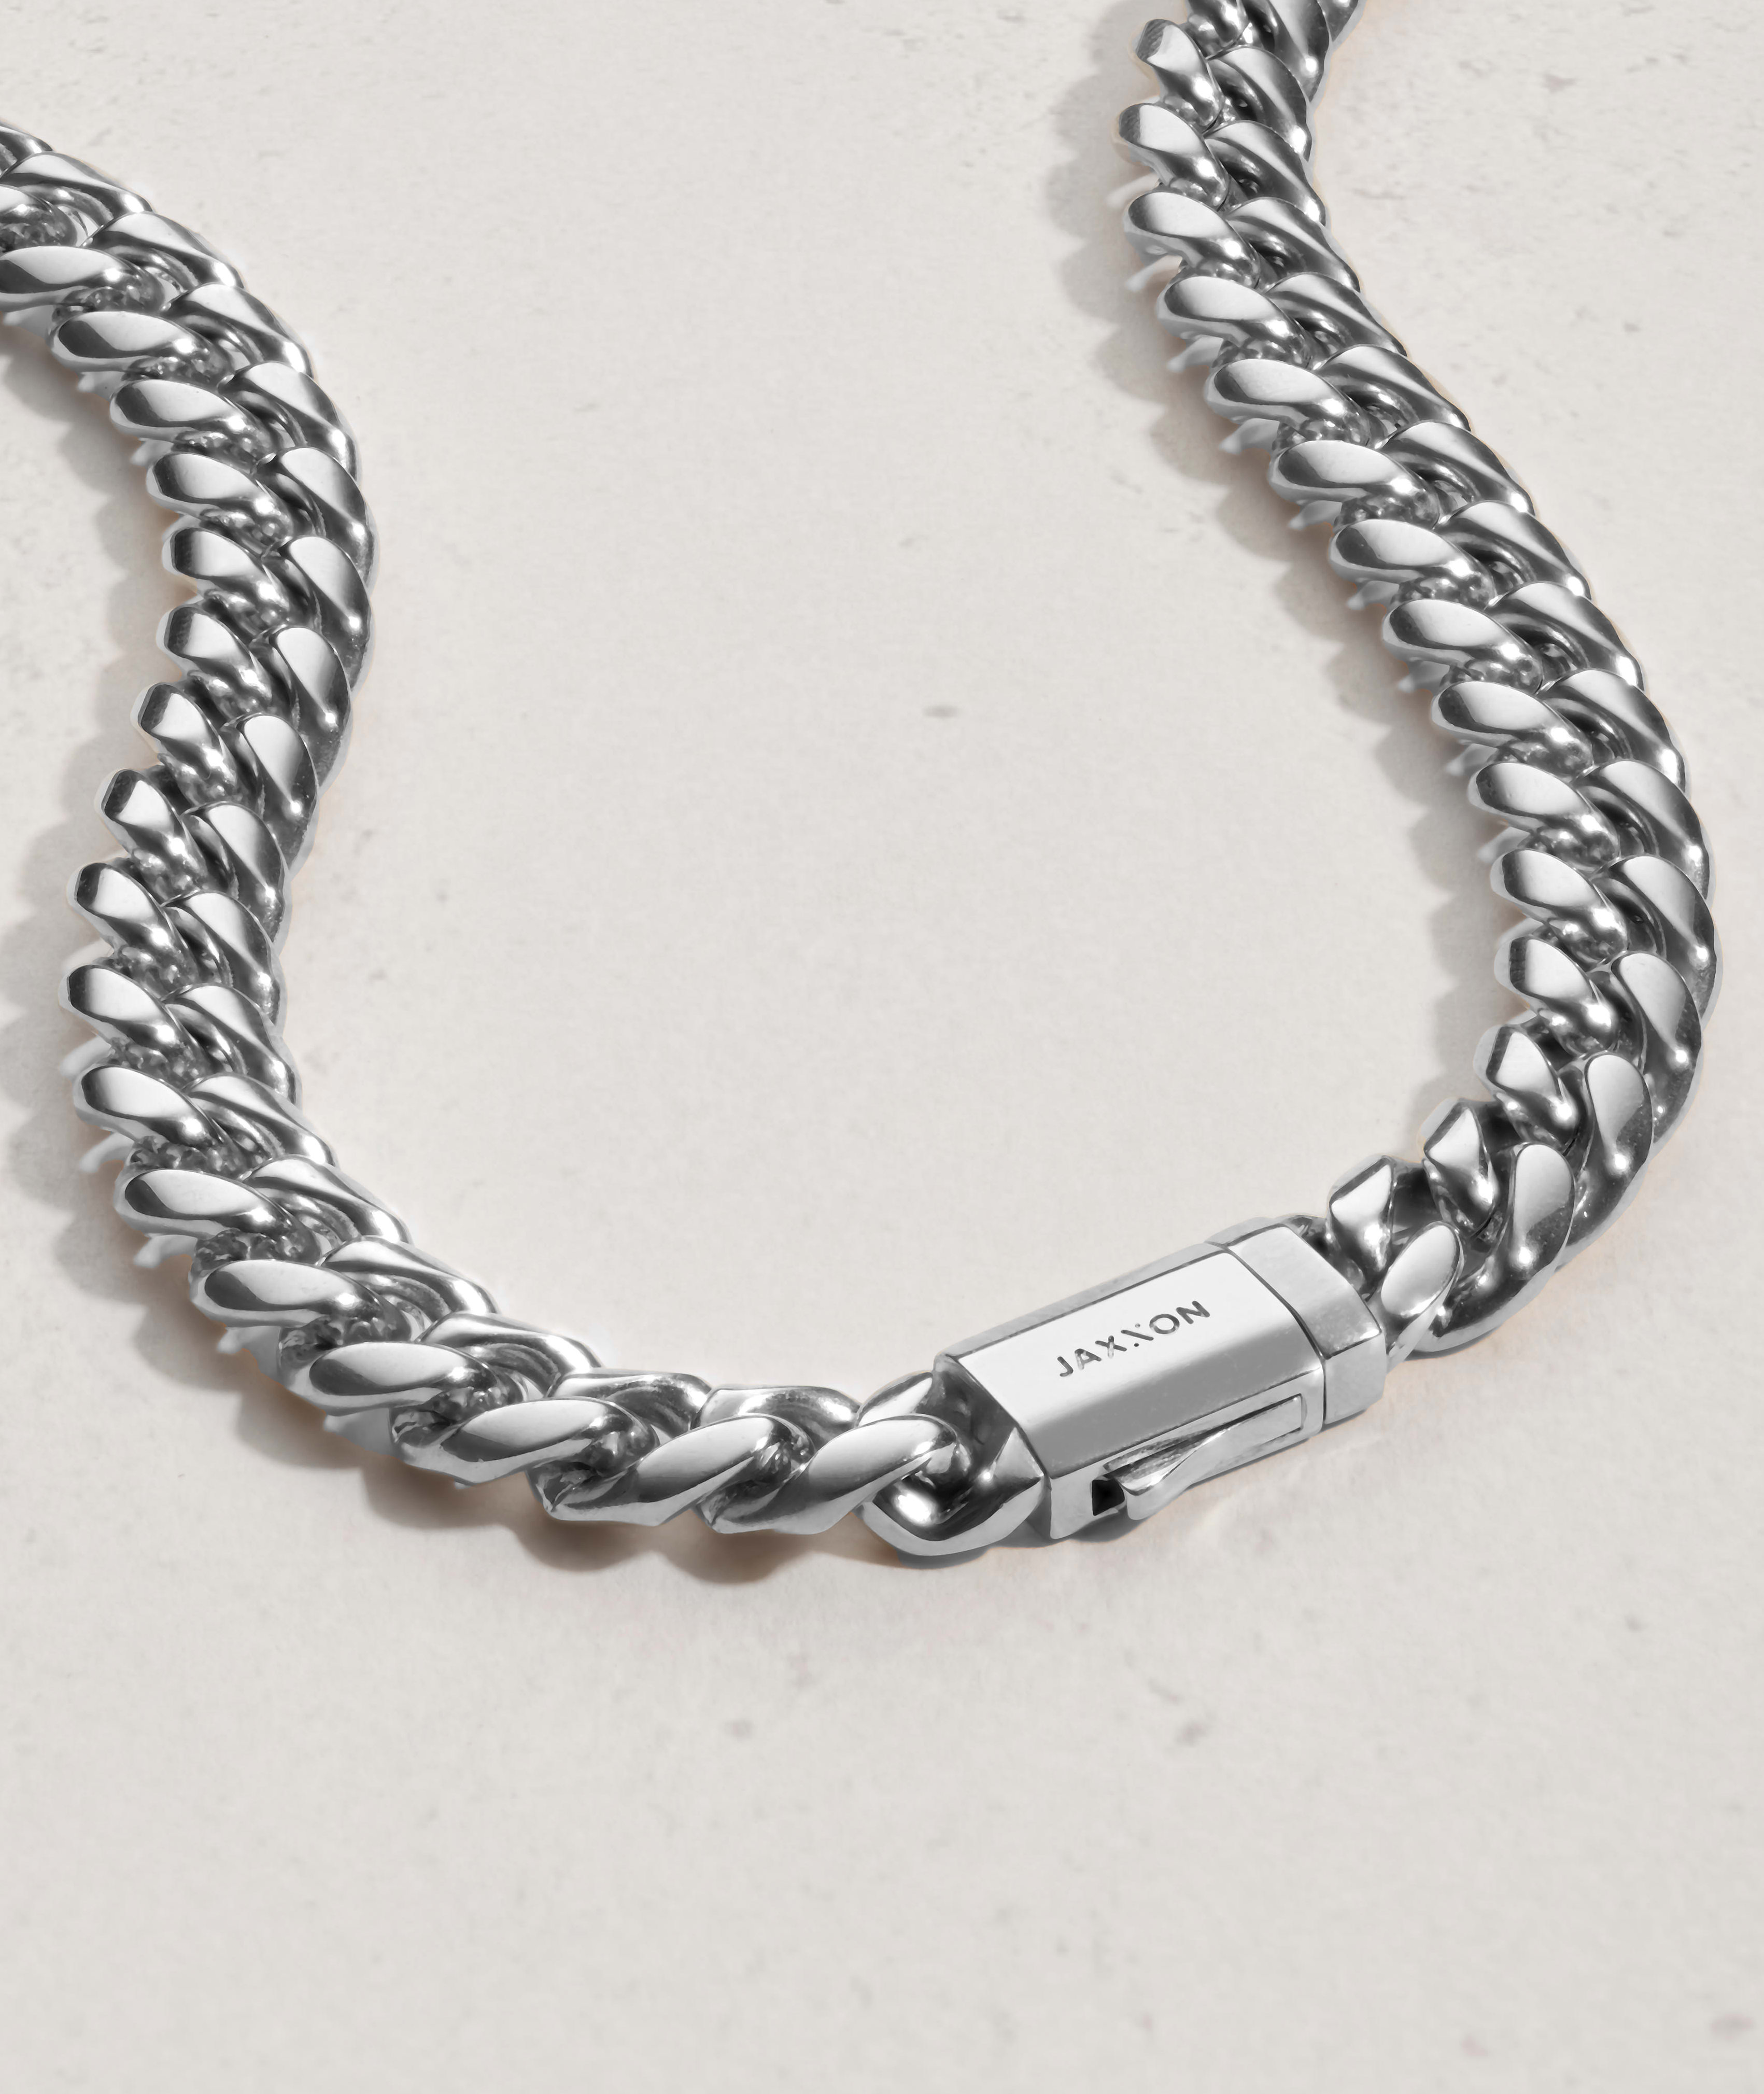 Image Cuban Link Chain - 10mm Silver - The Ultimate Clasp